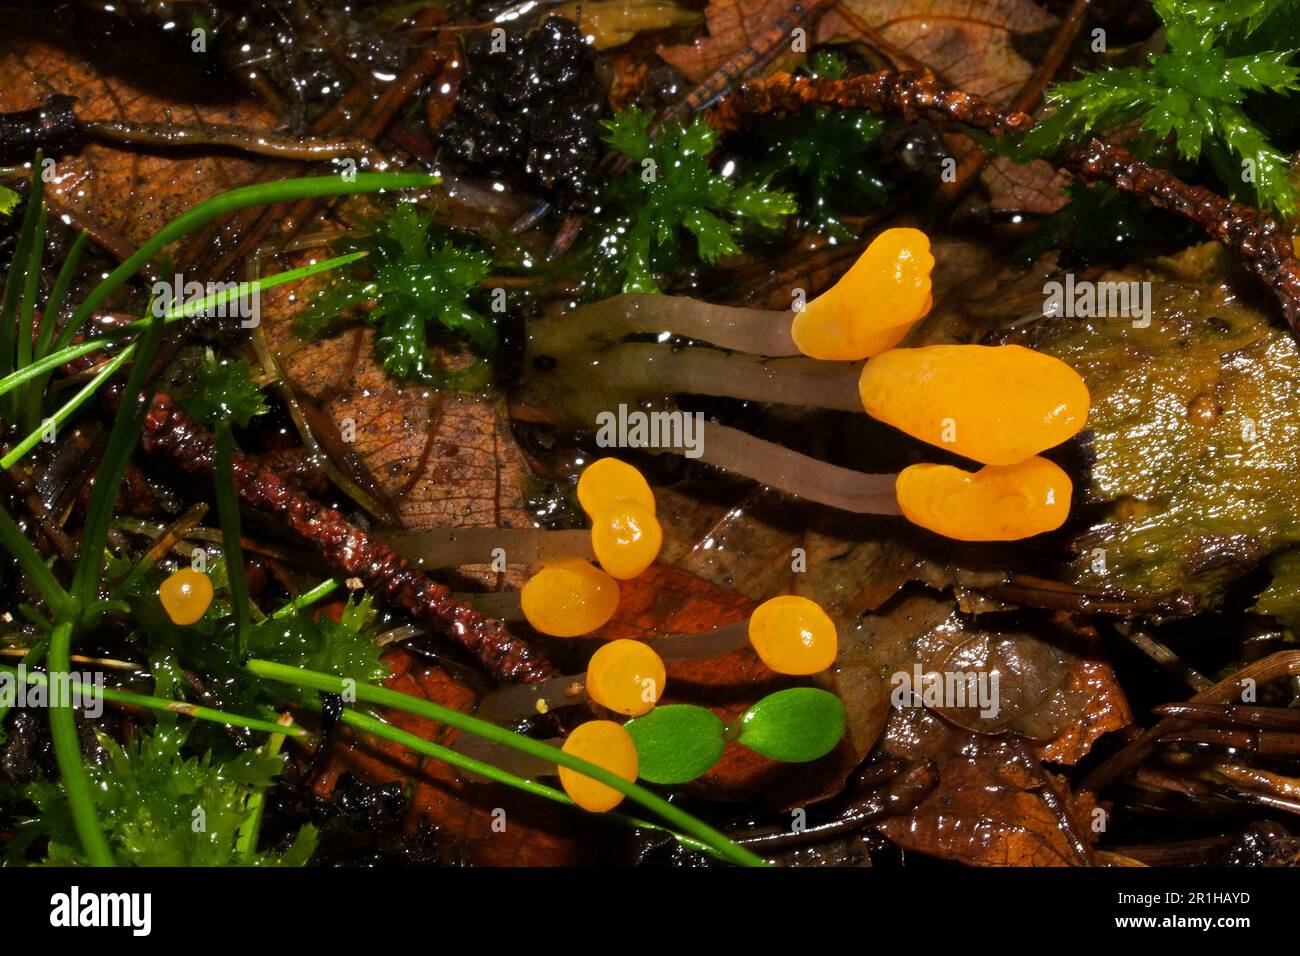 Mitrula paludosa (swamp beacon) is a fungus found in swamps and bogs. It occurs throughout the Northern Hemisphere and is recorded in South Africa. Stock Photo